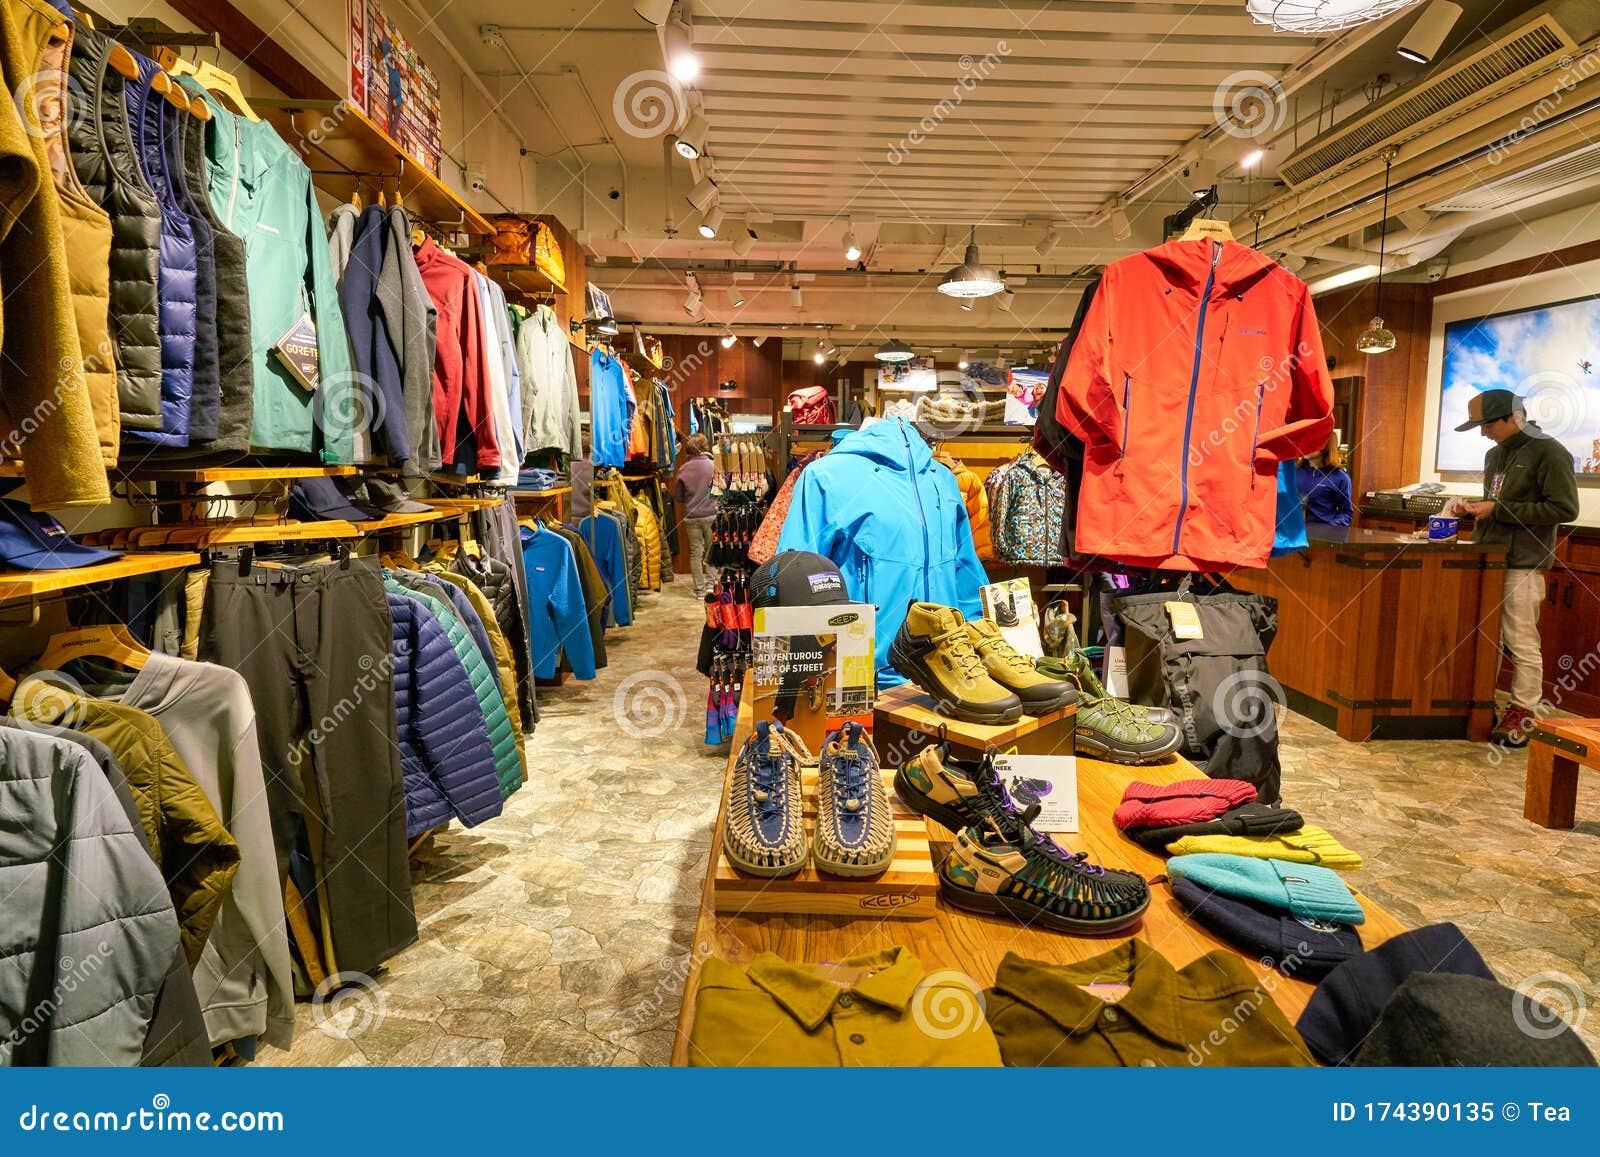 Patagonia Store Photos - Free & Royalty-Free Stock Photos from Dreamstime